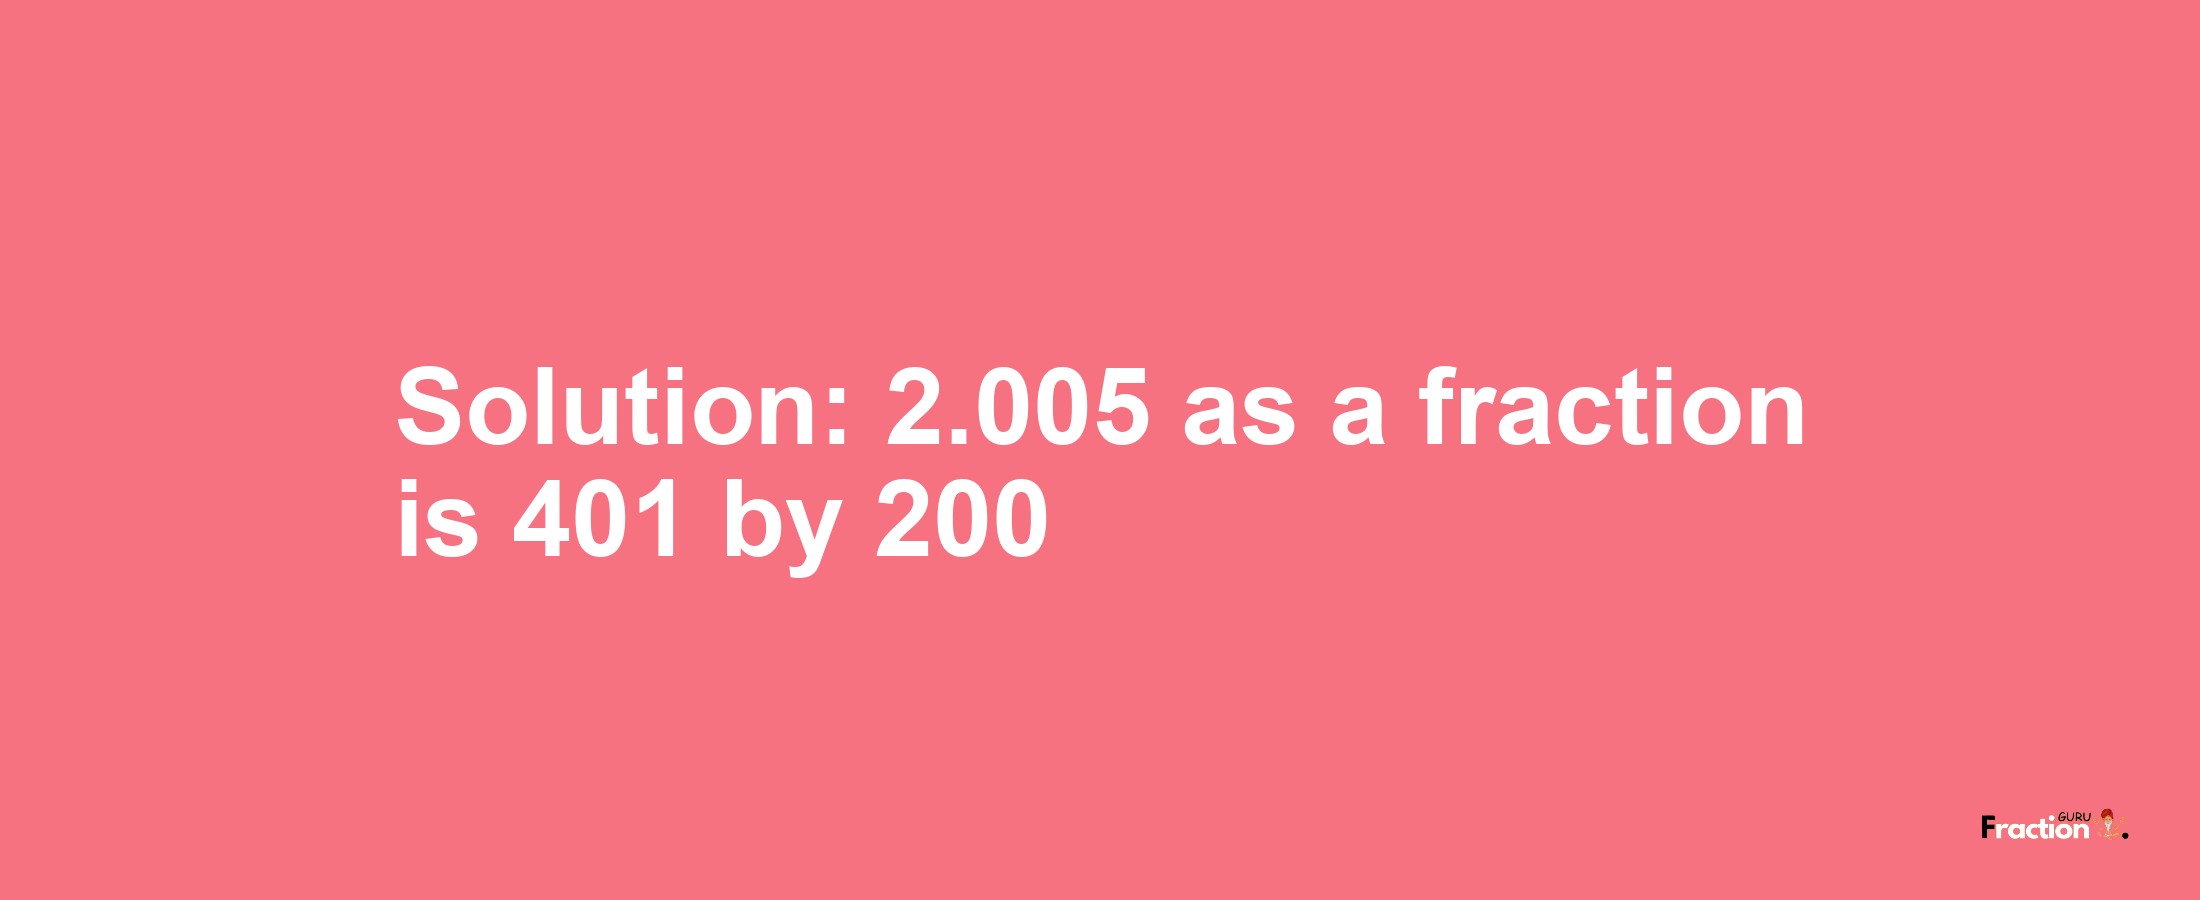 Solution:2.005 as a fraction is 401/200